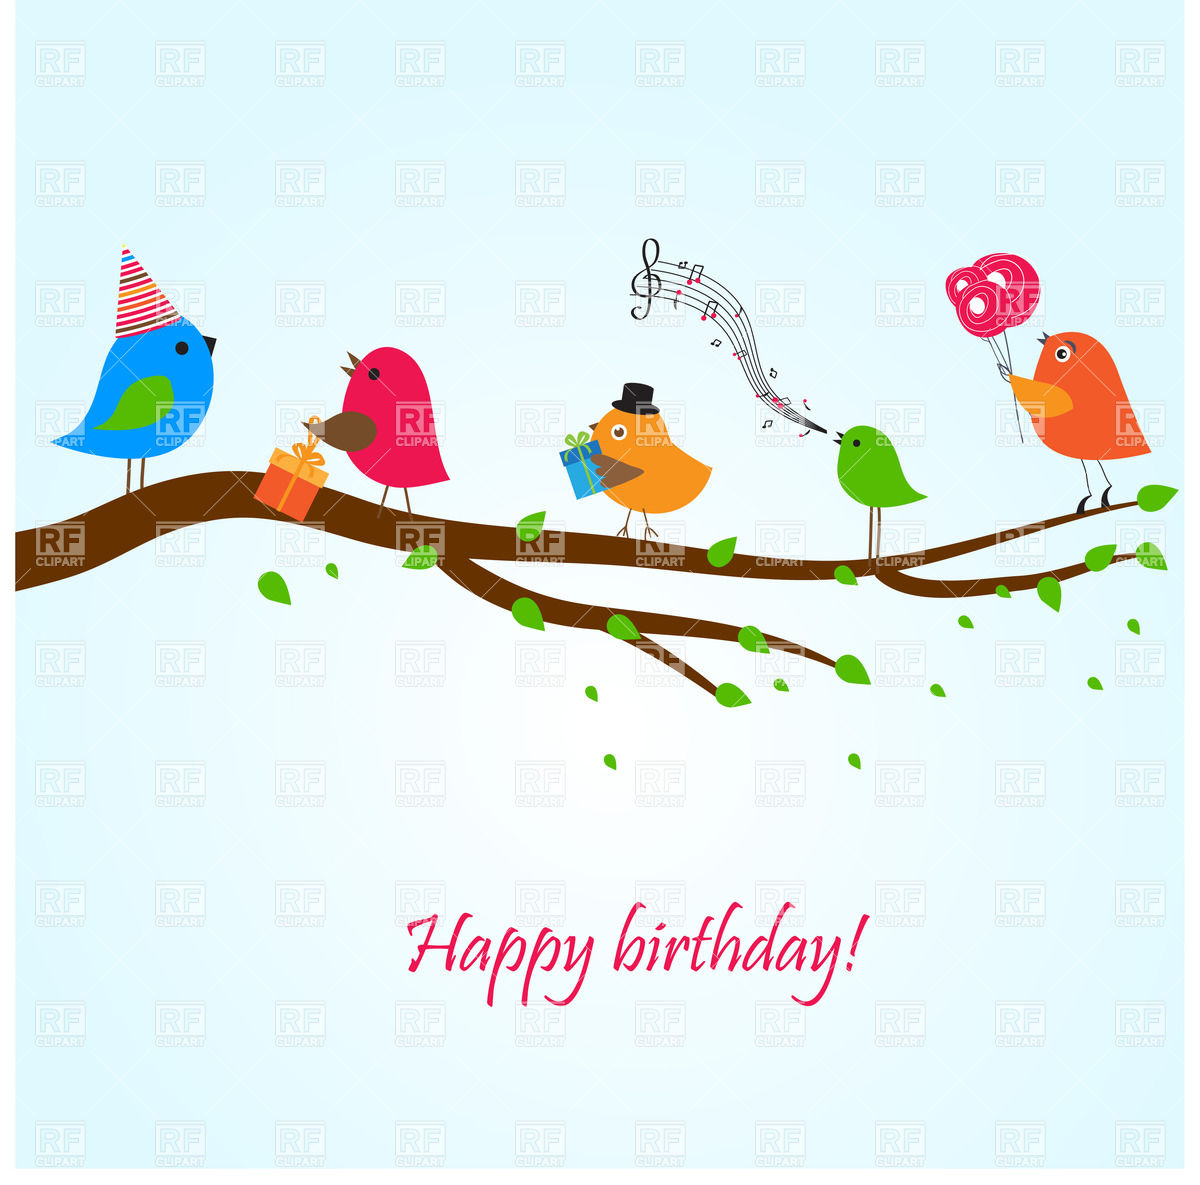 Birthday Wishes Clip Art - Cliparts.co